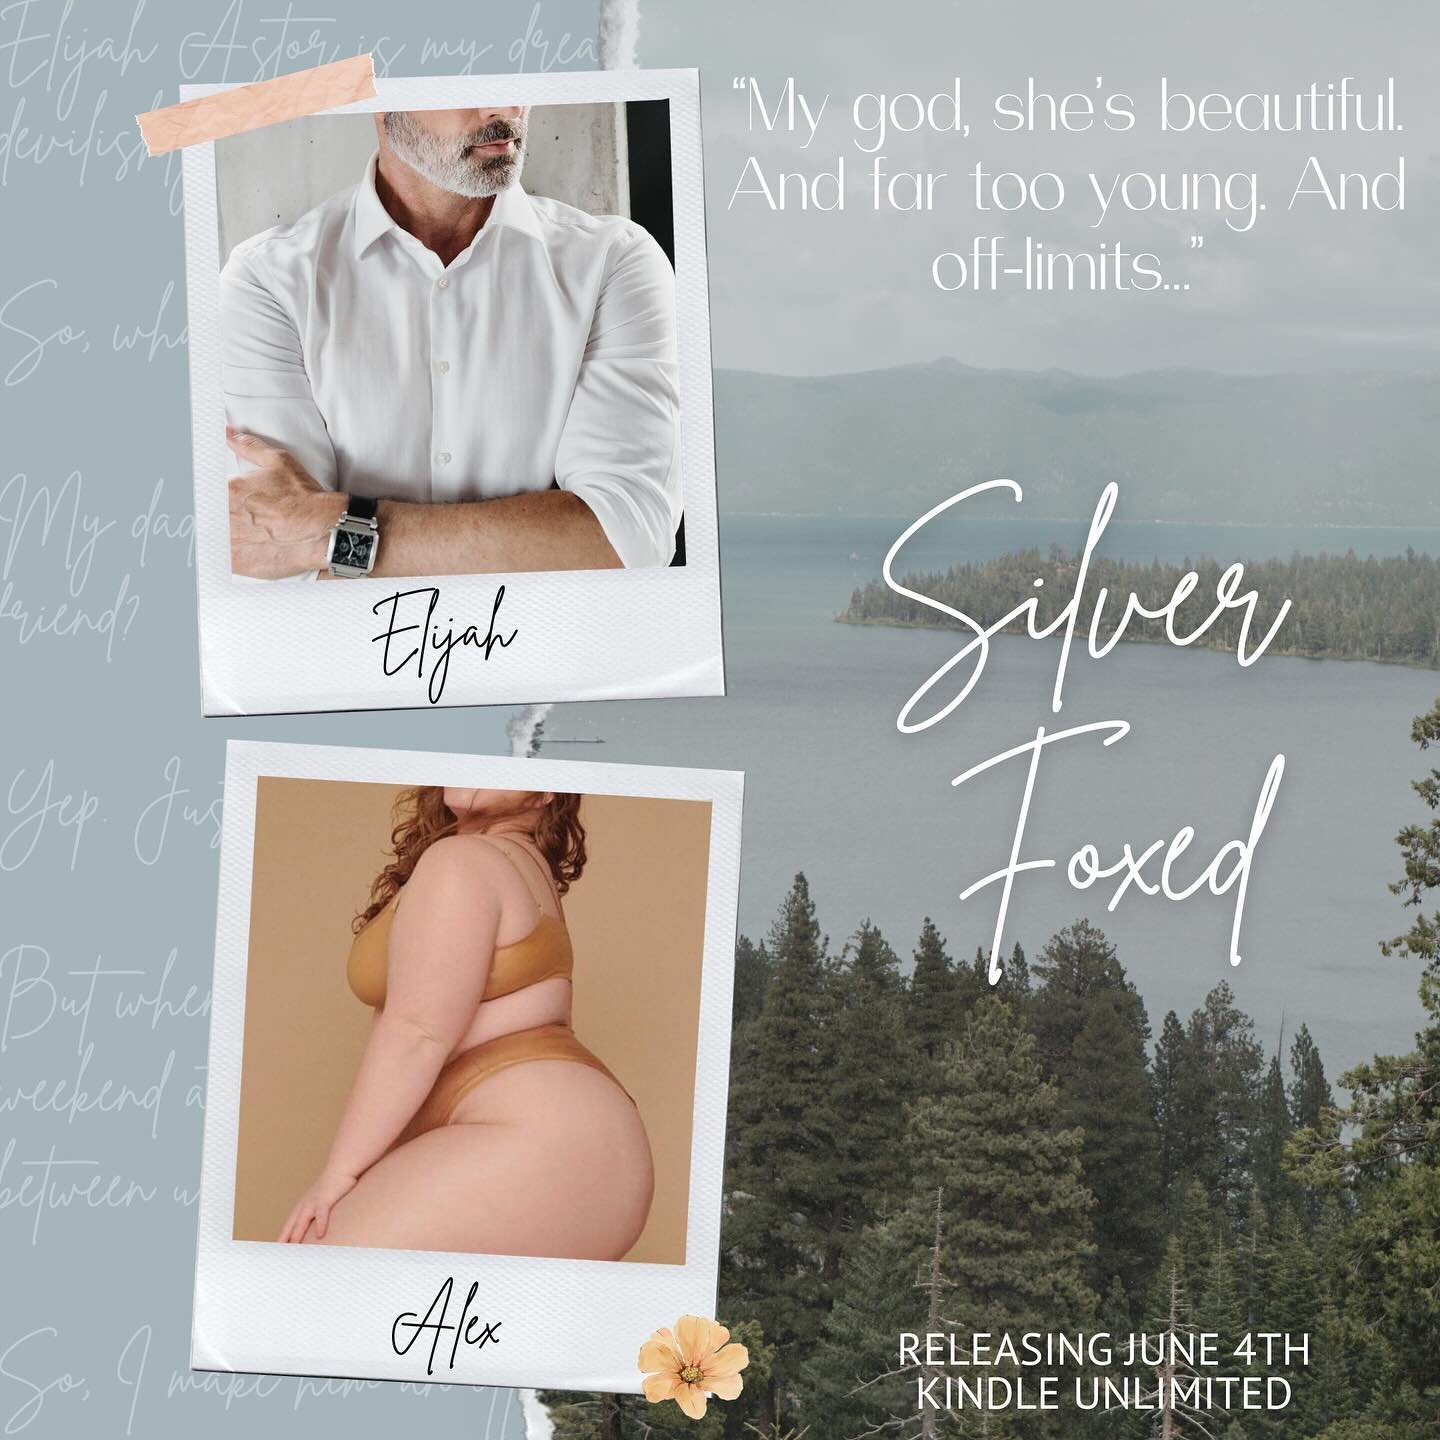 We&rsquo;re just 3 weeks away from the release of Silver Foxed! I can&rsquo;t wait for you to meet Elijah and Alex in this spicy age gap novella. 

Both covers are available for pre-order in ebook form. You can get the paperbacks on June 4th 🦊

🔗 i